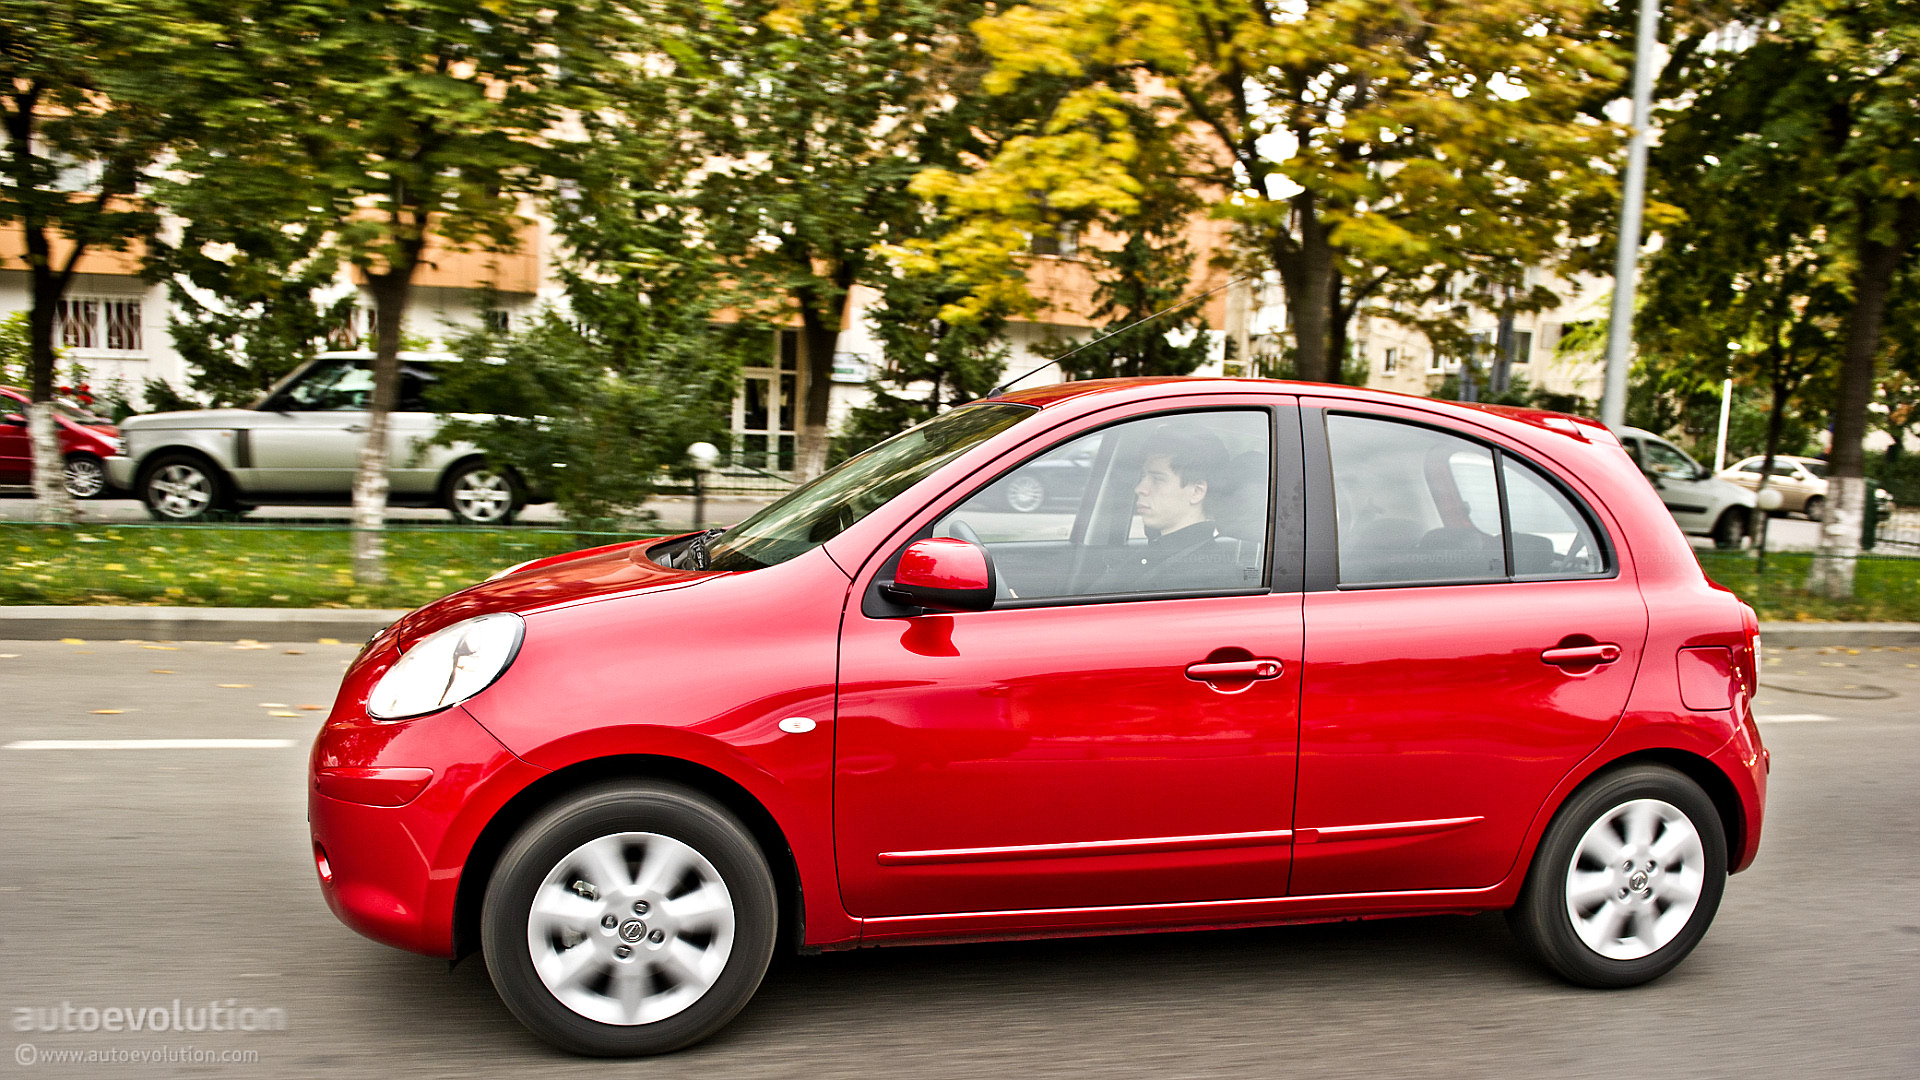 2011 Nissan micra safety rating #6